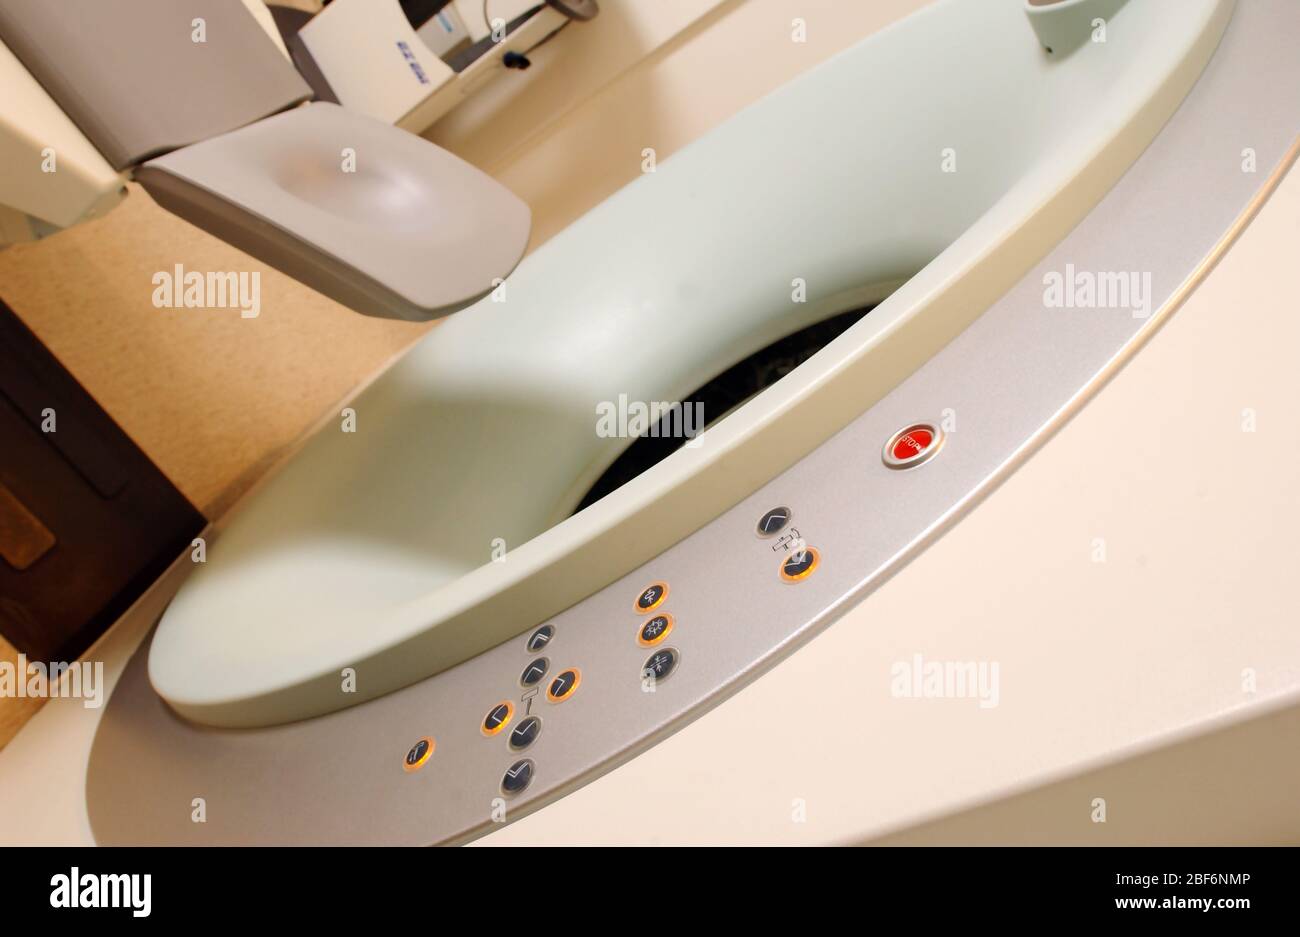 A Siemens CT scanner A computed tomography scanner which was developed by EMI, a UK company better known for its music and recording business. Introdu Stock Photo